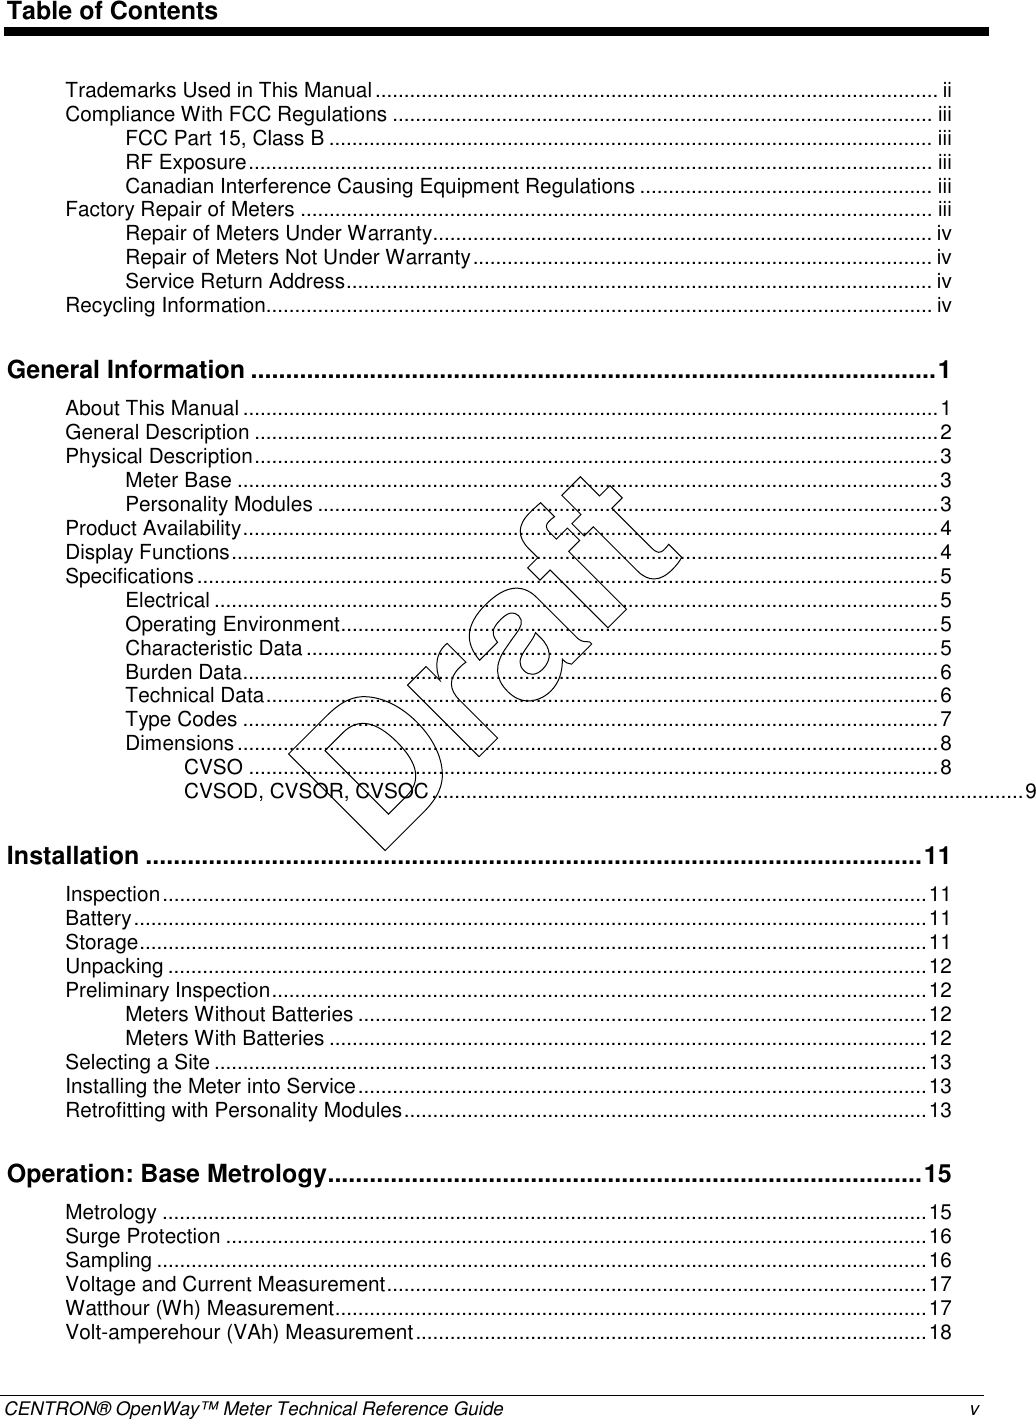  CENTRON® OpenWay™ Meter Technical Reference Guide  v  Table of Contents Trademarks Used in This Manual..................................................................................................ii Compliance With FCC Regulations .............................................................................................. iii FCC Part 15, Class B ......................................................................................................... iii RF Exposure....................................................................................................................... iii Canadian Interference Causing Equipment Regulations ................................................... iii Factory Repair of Meters .............................................................................................................. iii Repair of Meters Under Warranty....................................................................................... iv Repair of Meters Not Under Warranty................................................................................ iv Service Return Address...................................................................................................... iv Recycling Information.................................................................................................................... iv General Information ..................................................................................................1 About This Manual .........................................................................................................................1 General Description .......................................................................................................................2 Physical Description.......................................................................................................................3 Meter Base ..........................................................................................................................3 Personality Modules ............................................................................................................3 Product Availability.........................................................................................................................4 Display Functions...........................................................................................................................4 Specifications.................................................................................................................................5 Electrical ..............................................................................................................................5 Operating Environment........................................................................................................5 Characteristic Data ..............................................................................................................5 Burden Data.........................................................................................................................6 Technical Data.....................................................................................................................6 Type Codes .........................................................................................................................7 Dimensions..........................................................................................................................8 CVSO ........................................................................................................................8 CVSOD, CVSOR, CVSOC.......................................................................................................9 Installation ...............................................................................................................11 Inspection.....................................................................................................................................11 Battery..........................................................................................................................................11 Storage.........................................................................................................................................11 Unpacking ....................................................................................................................................12 Preliminary Inspection..................................................................................................................12 Meters Without Batteries ...................................................................................................12 Meters With Batteries ........................................................................................................12 Selecting a Site ............................................................................................................................13 Installing the Meter into Service...................................................................................................13 Retrofitting with Personality Modules...........................................................................................13 Operation: Base Metrology.....................................................................................15 Metrology .....................................................................................................................................15 Surge Protection ..........................................................................................................................16 Sampling ......................................................................................................................................16 Voltage and Current Measurement..............................................................................................17 Watthour (Wh) Measurement.......................................................................................................17 Volt-amperehour (VAh) Measurement.........................................................................................18 Draft